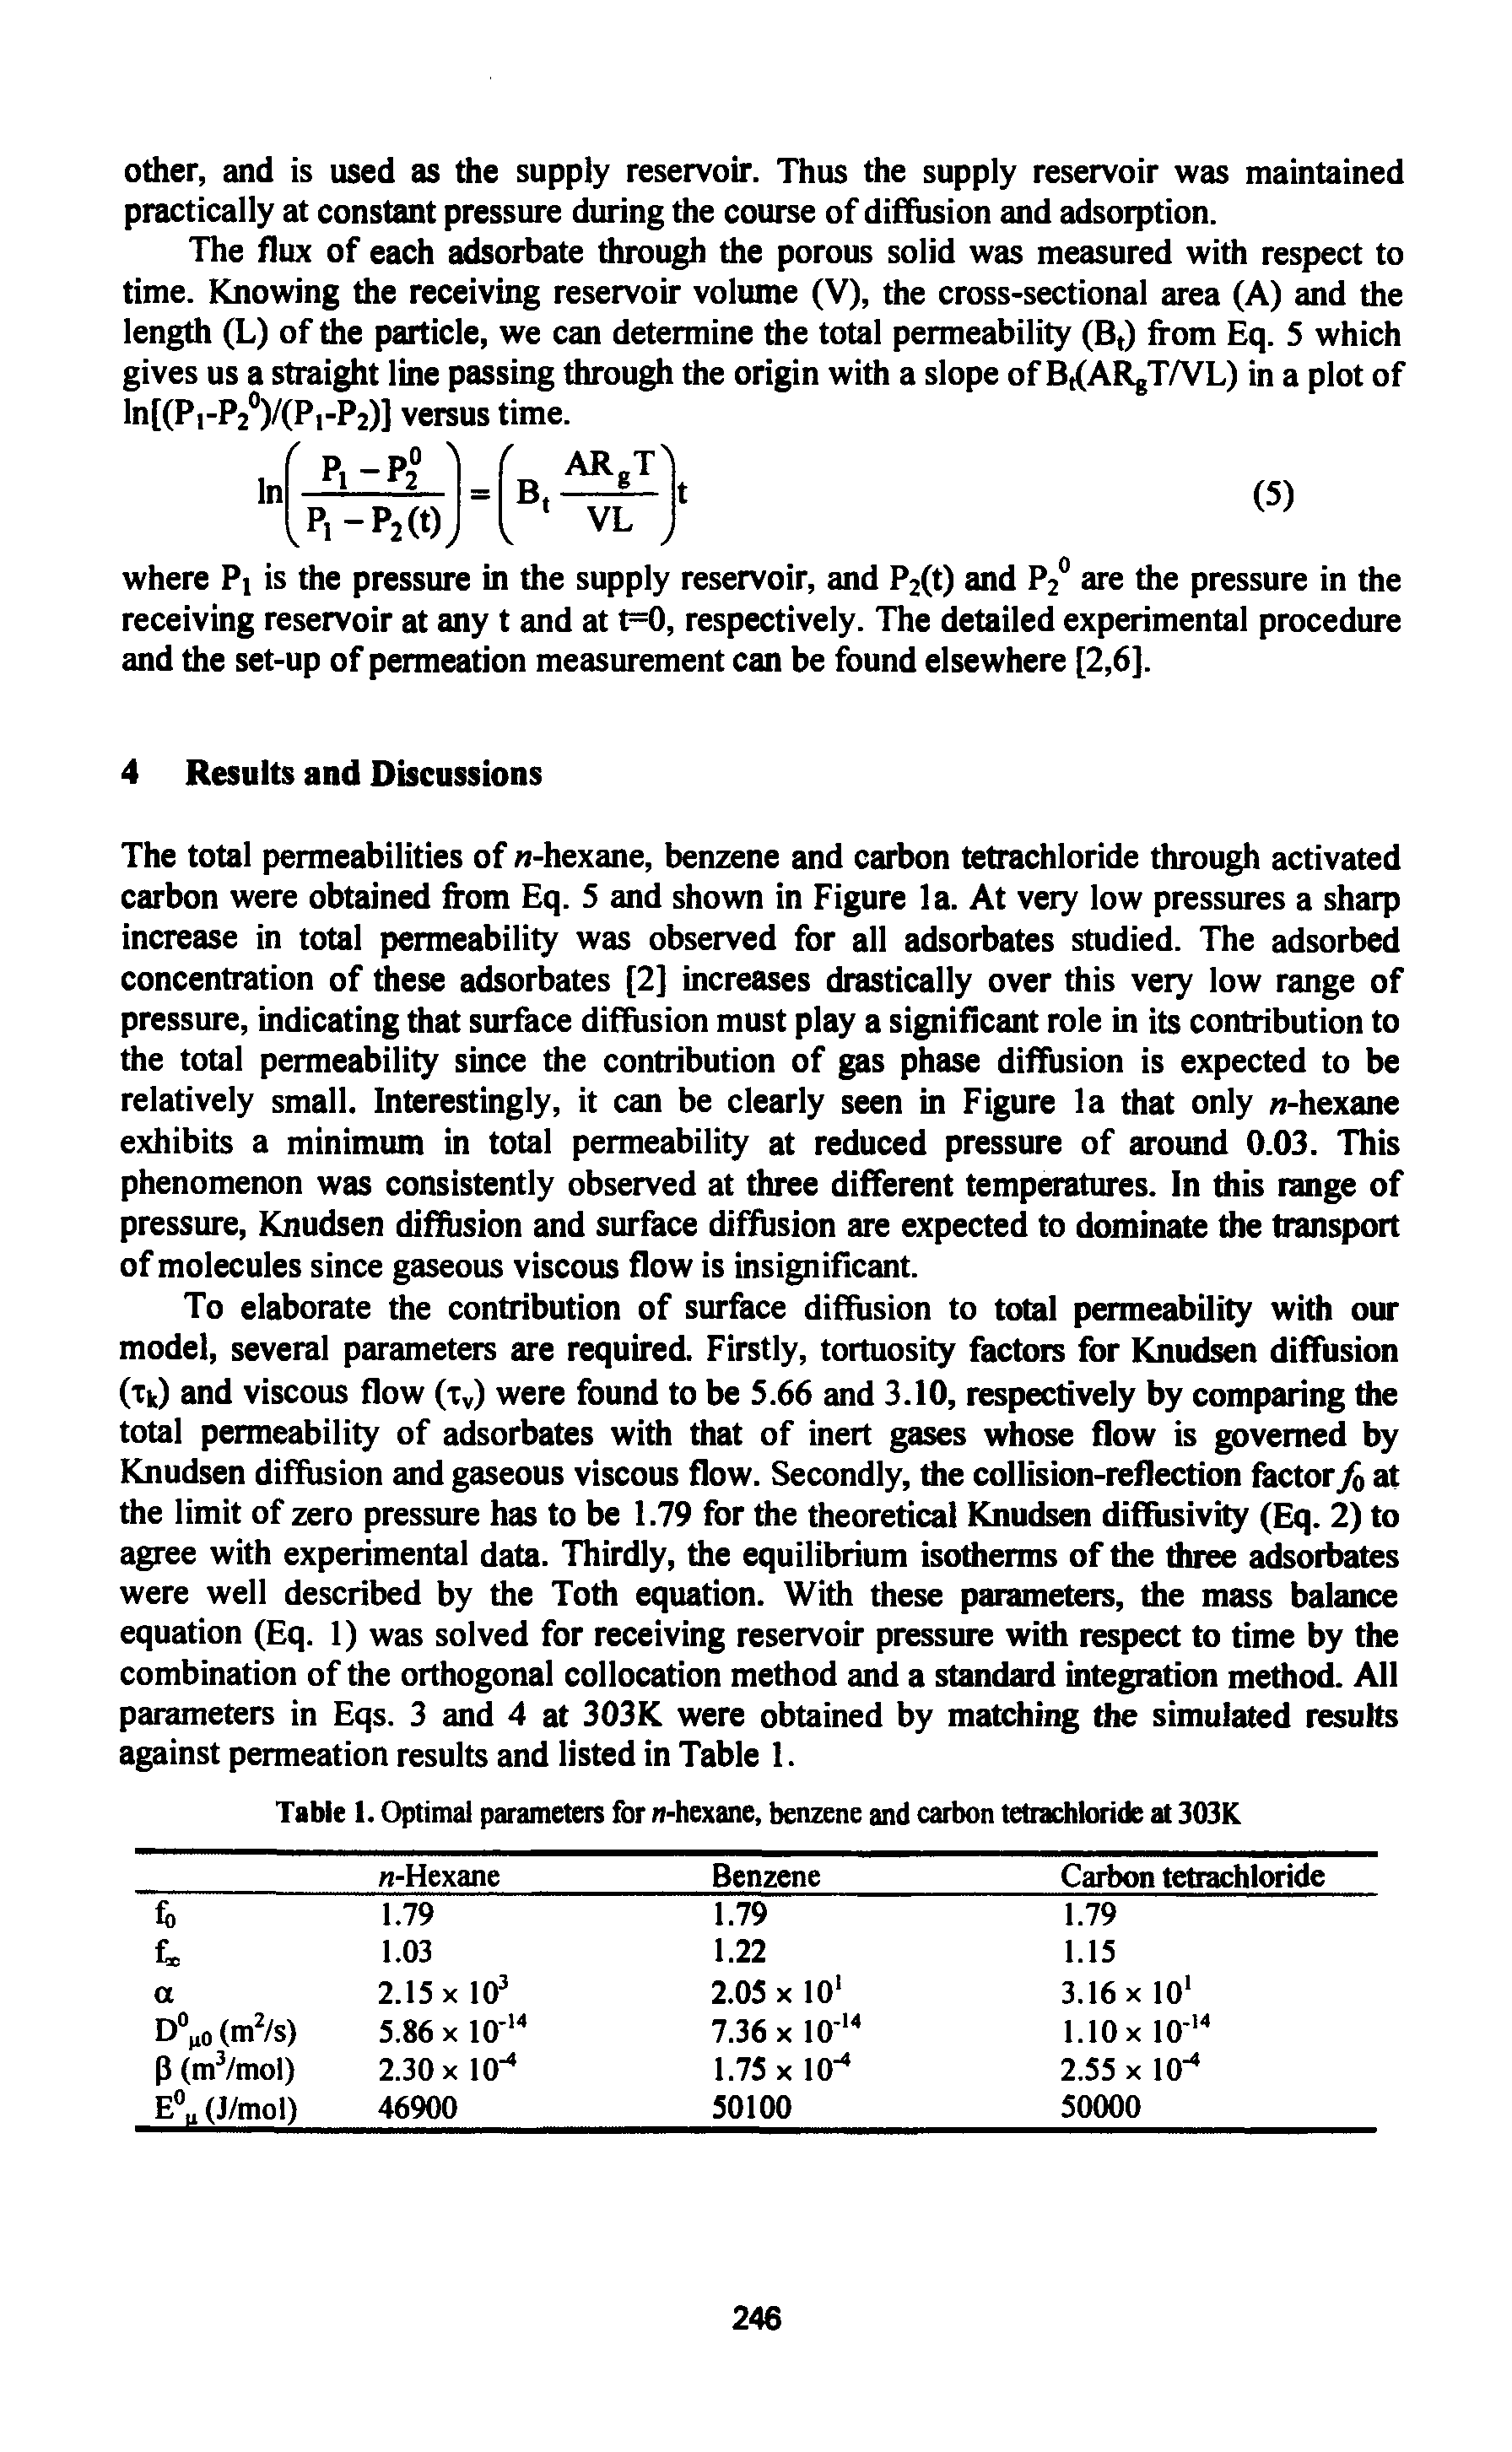 Table 1. Optimal parameteis for n-hexane, benzene and caibon tetrachloride at 3Q3K...